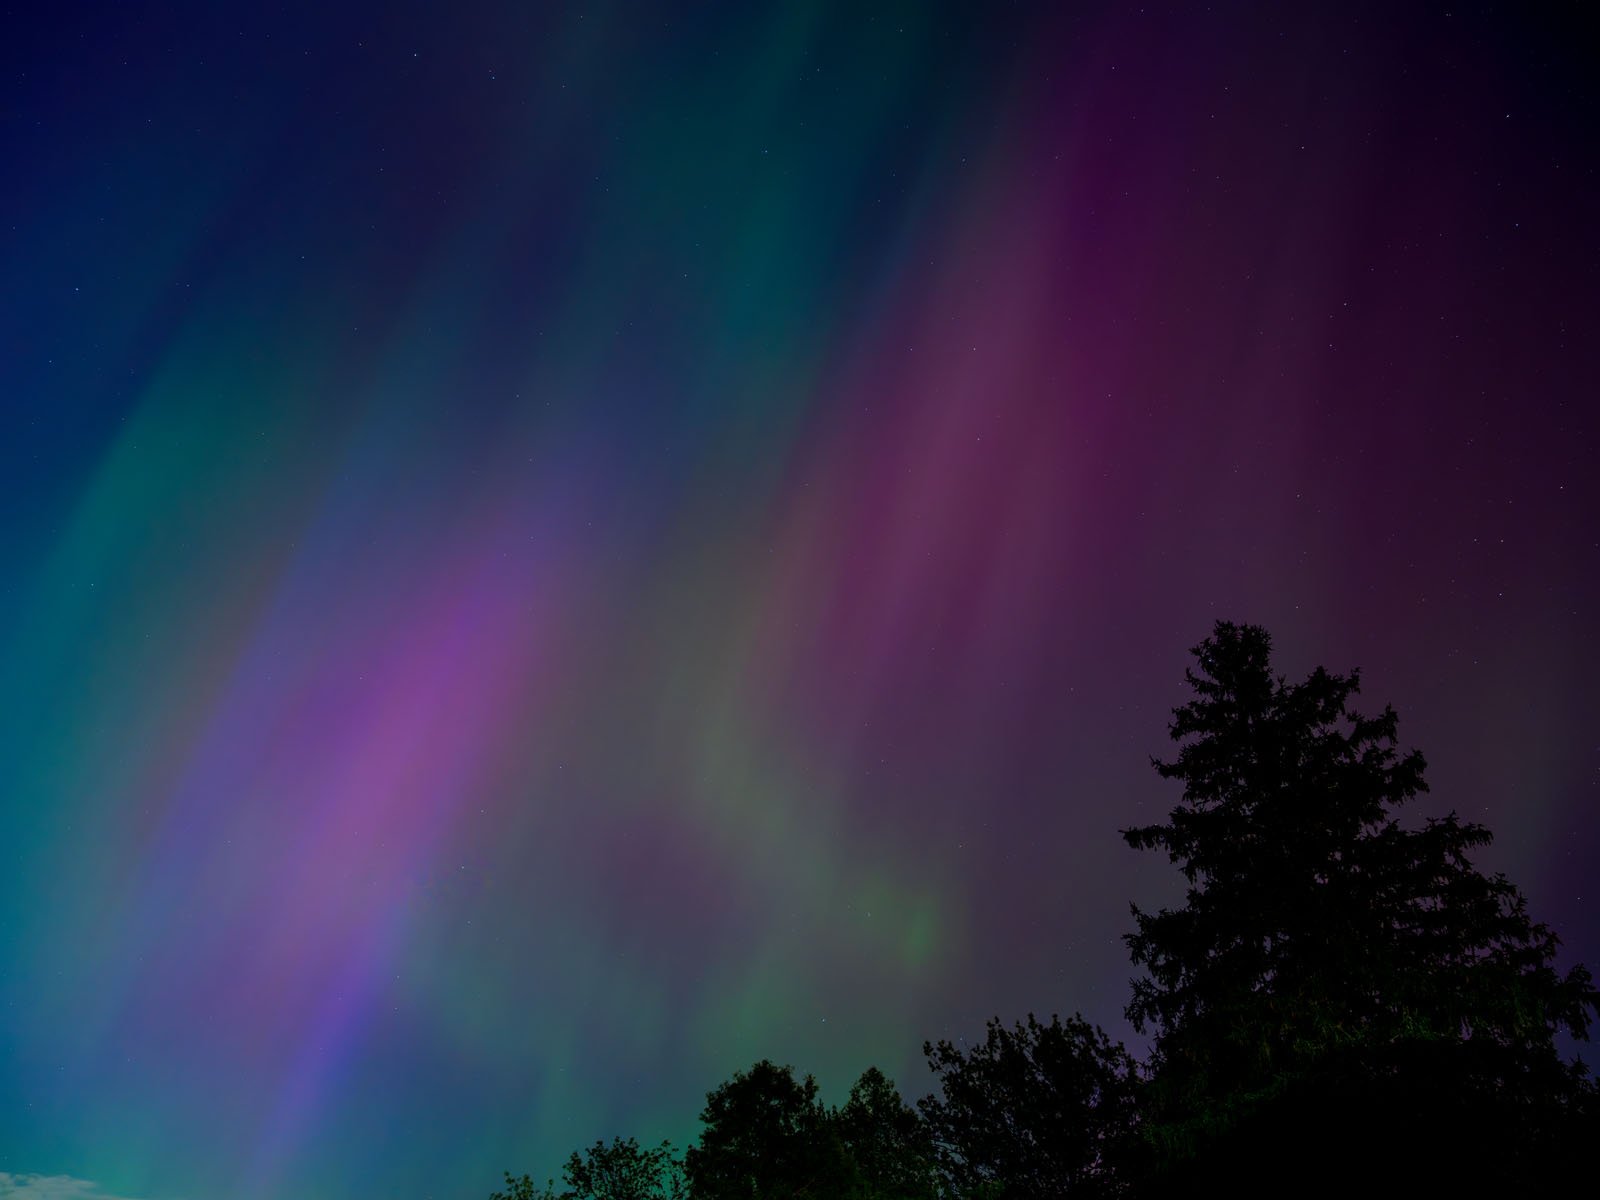 A vibrant display of the Northern Lights in the night sky, showing streaks of purple, blue, and green above a dark silhouette of a tree.